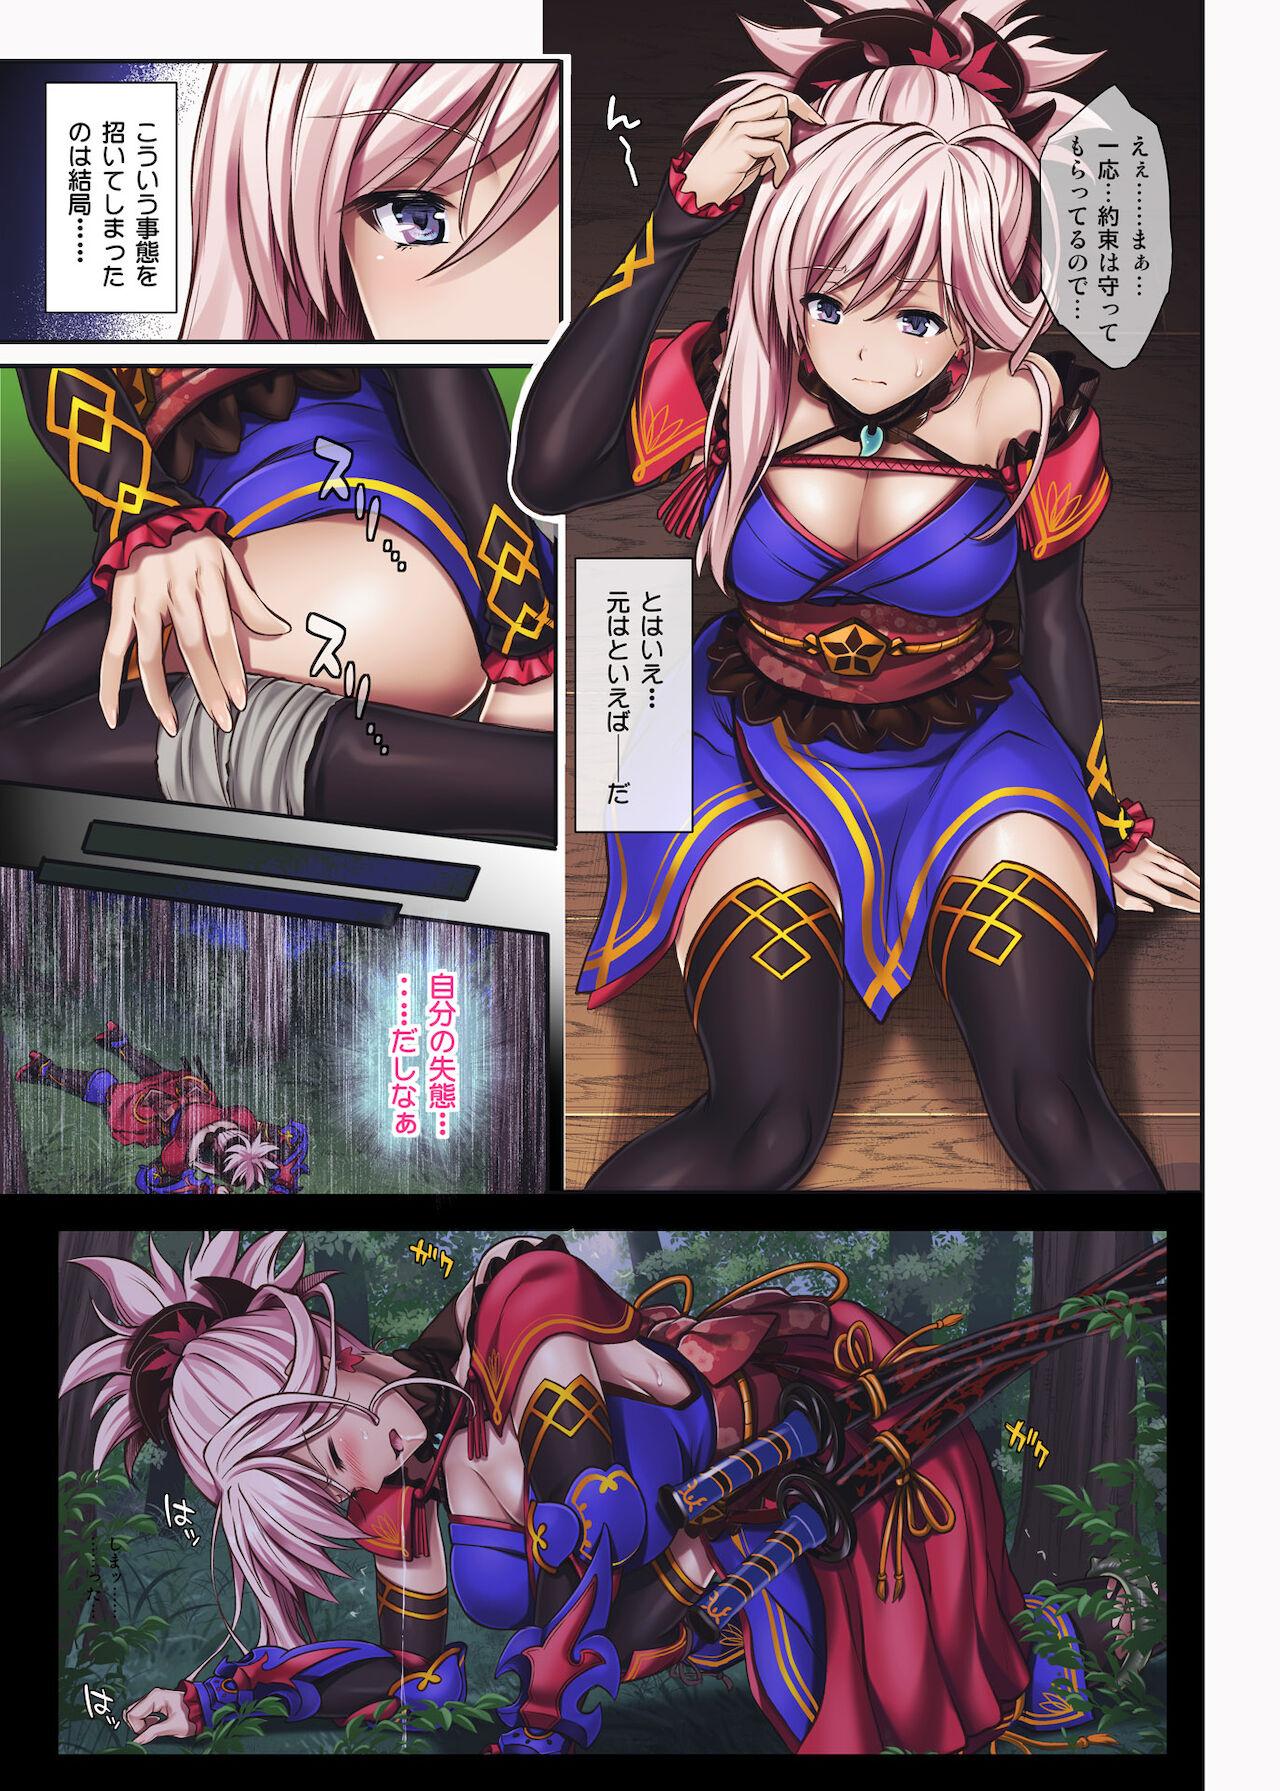 Free Amateur Porn Cyclone no Doujinshi Full Color Pack 4 - Fate grand order Step Mom - Page 6